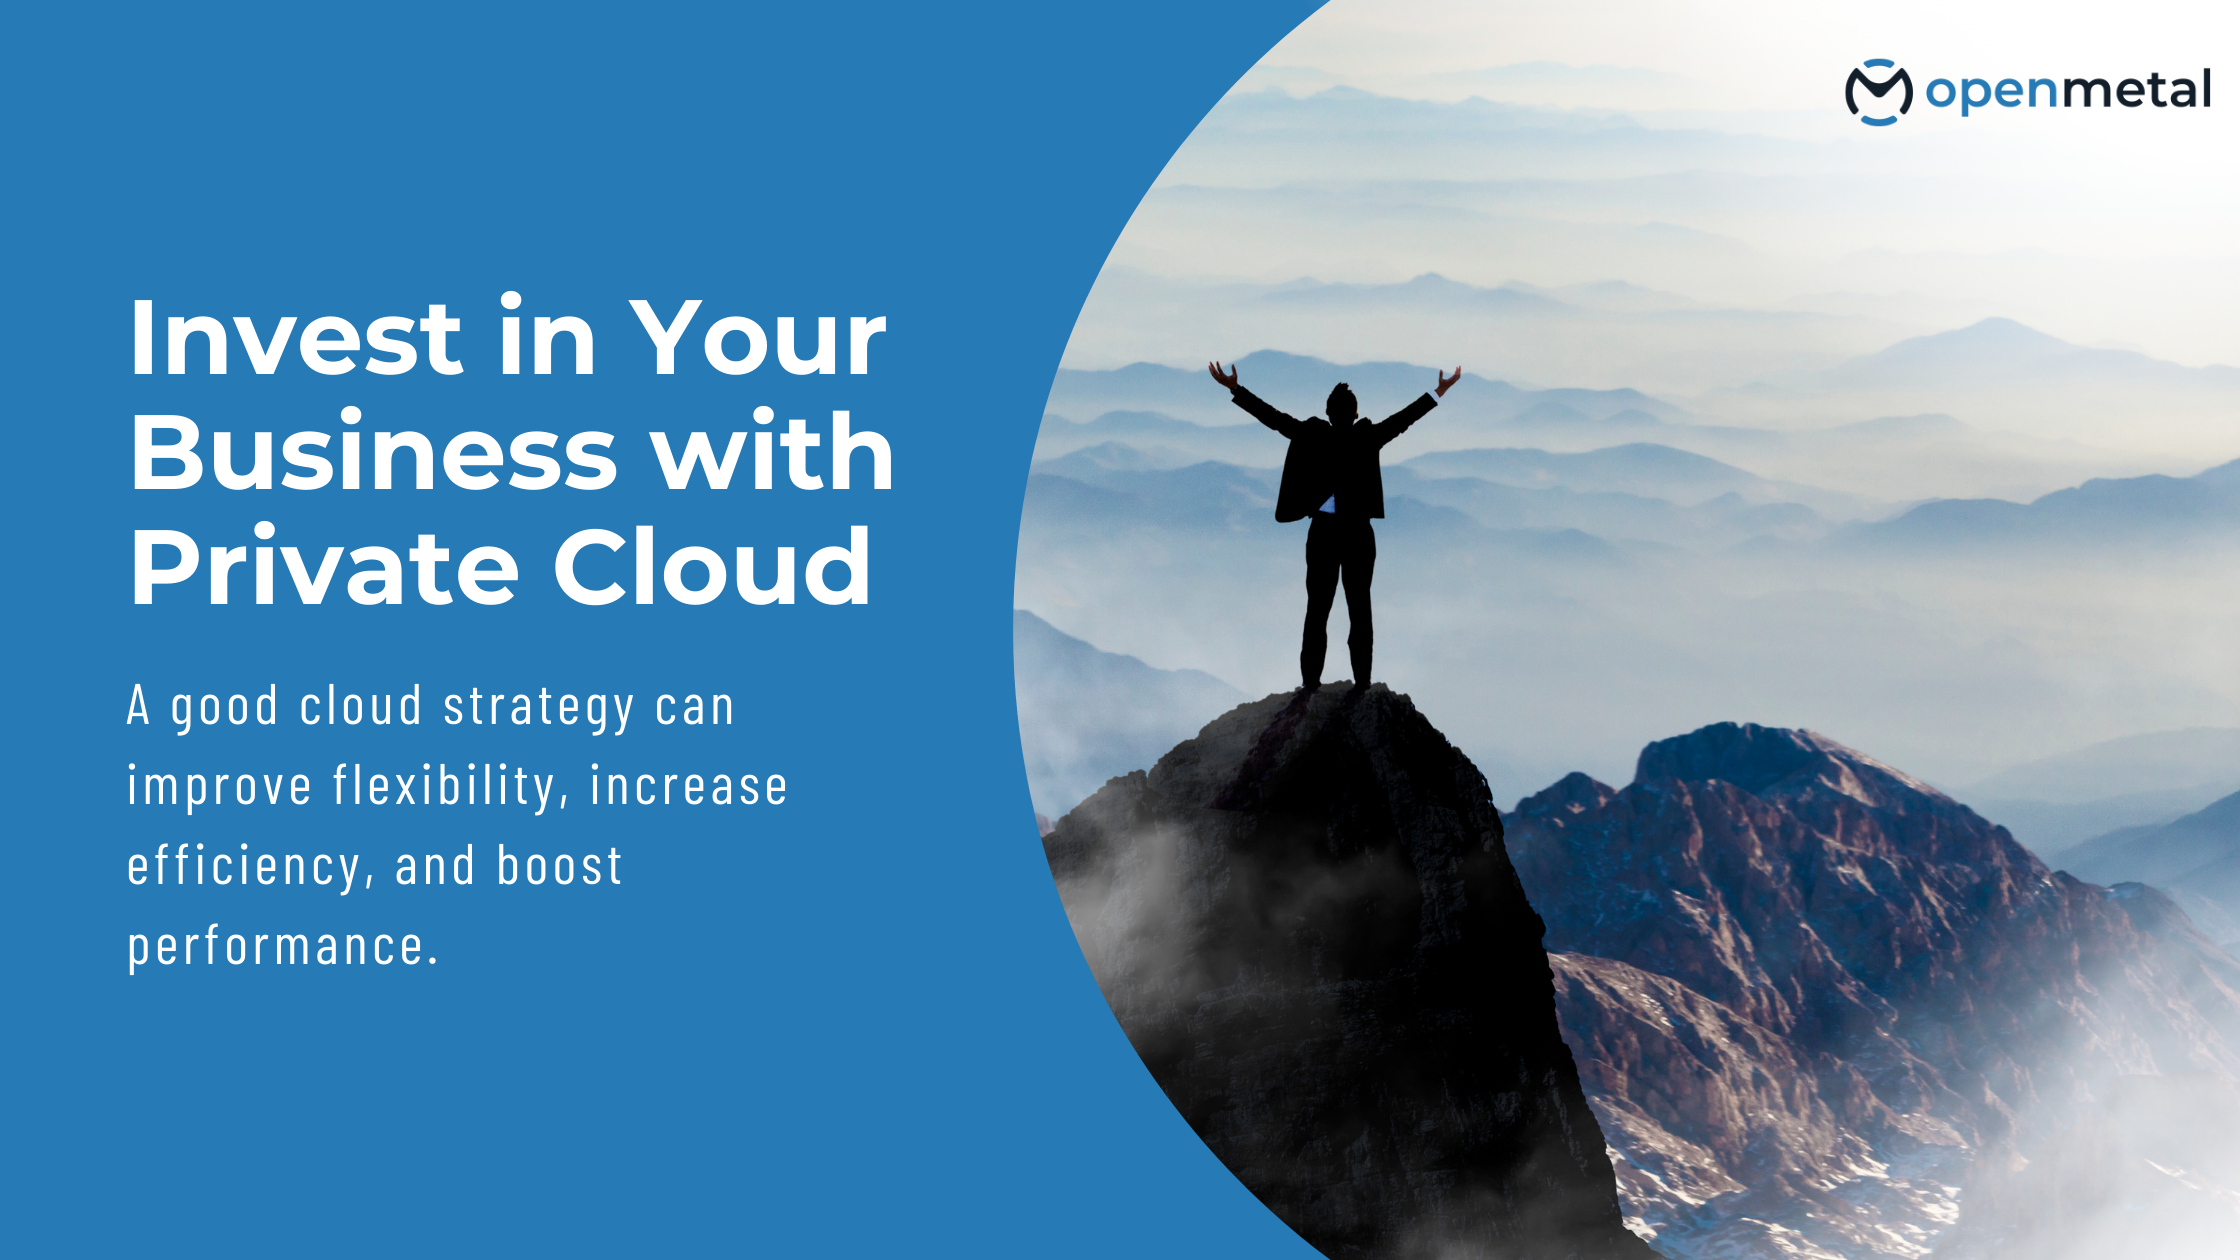 Why Should Your Business Use a Private Cloud?